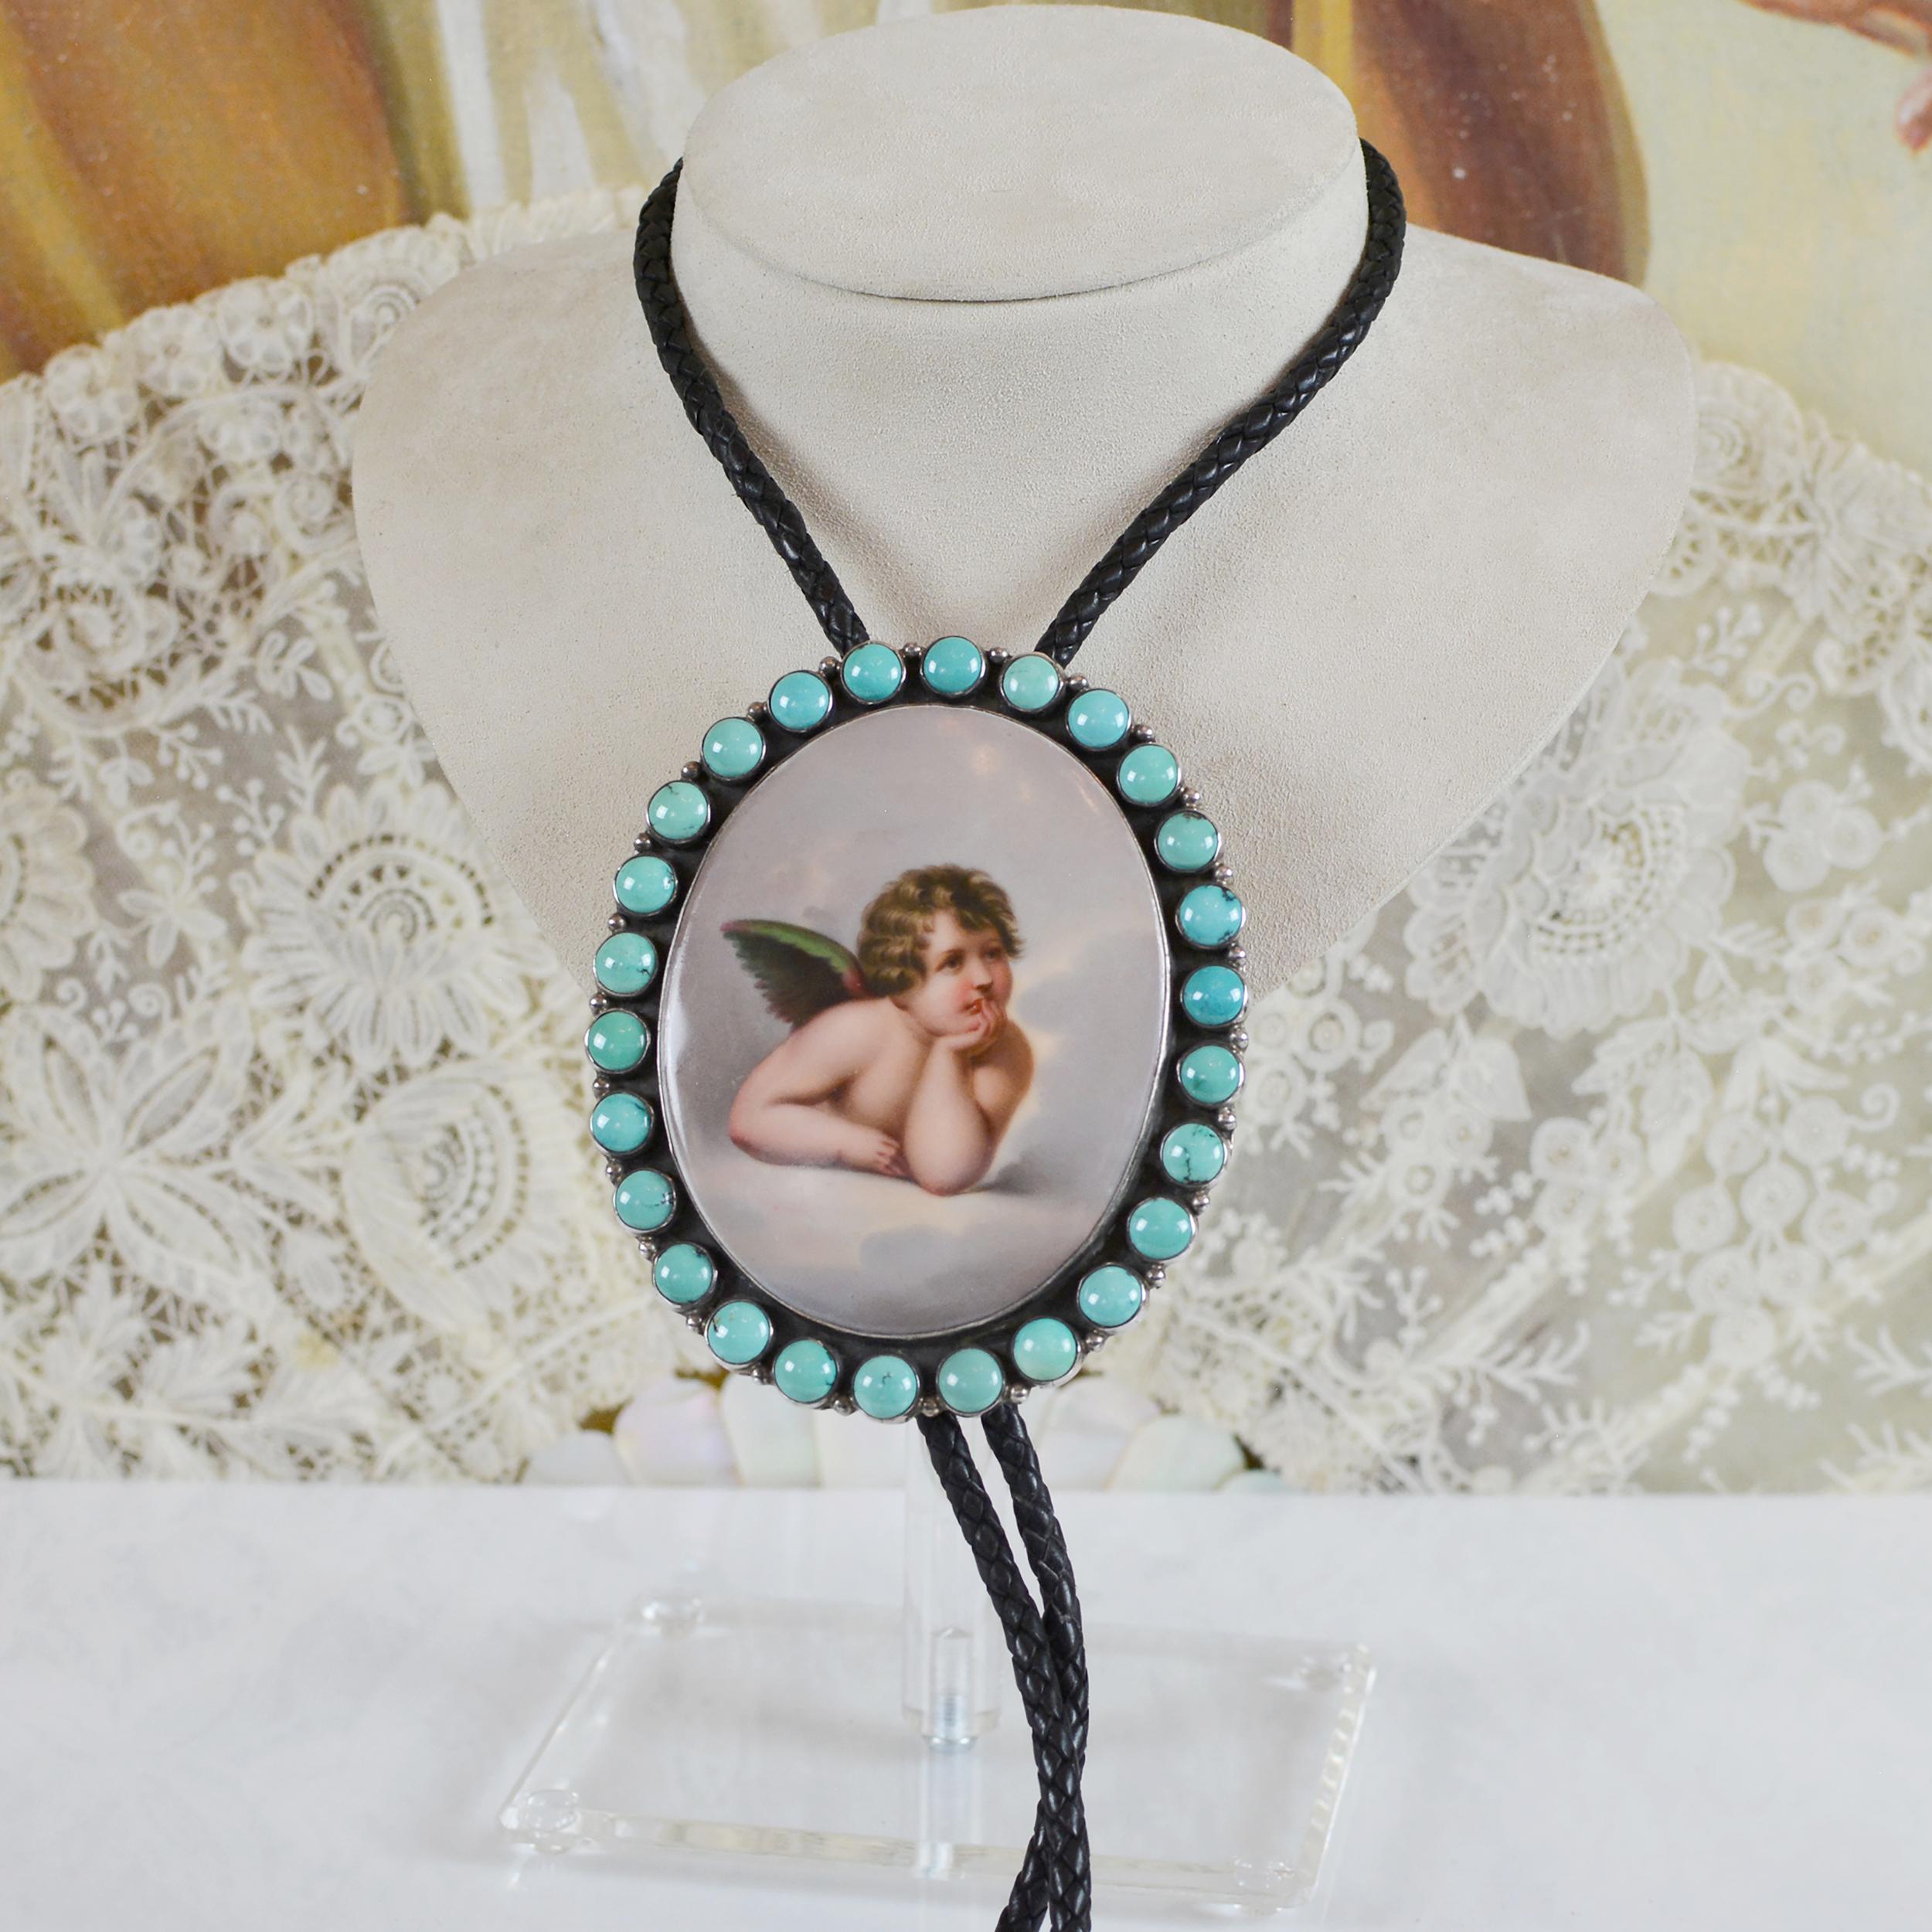 Jill Garber 19th Century Sistine Madonna Angel Portrait with Turquoise Bolo Tie  For Sale 3